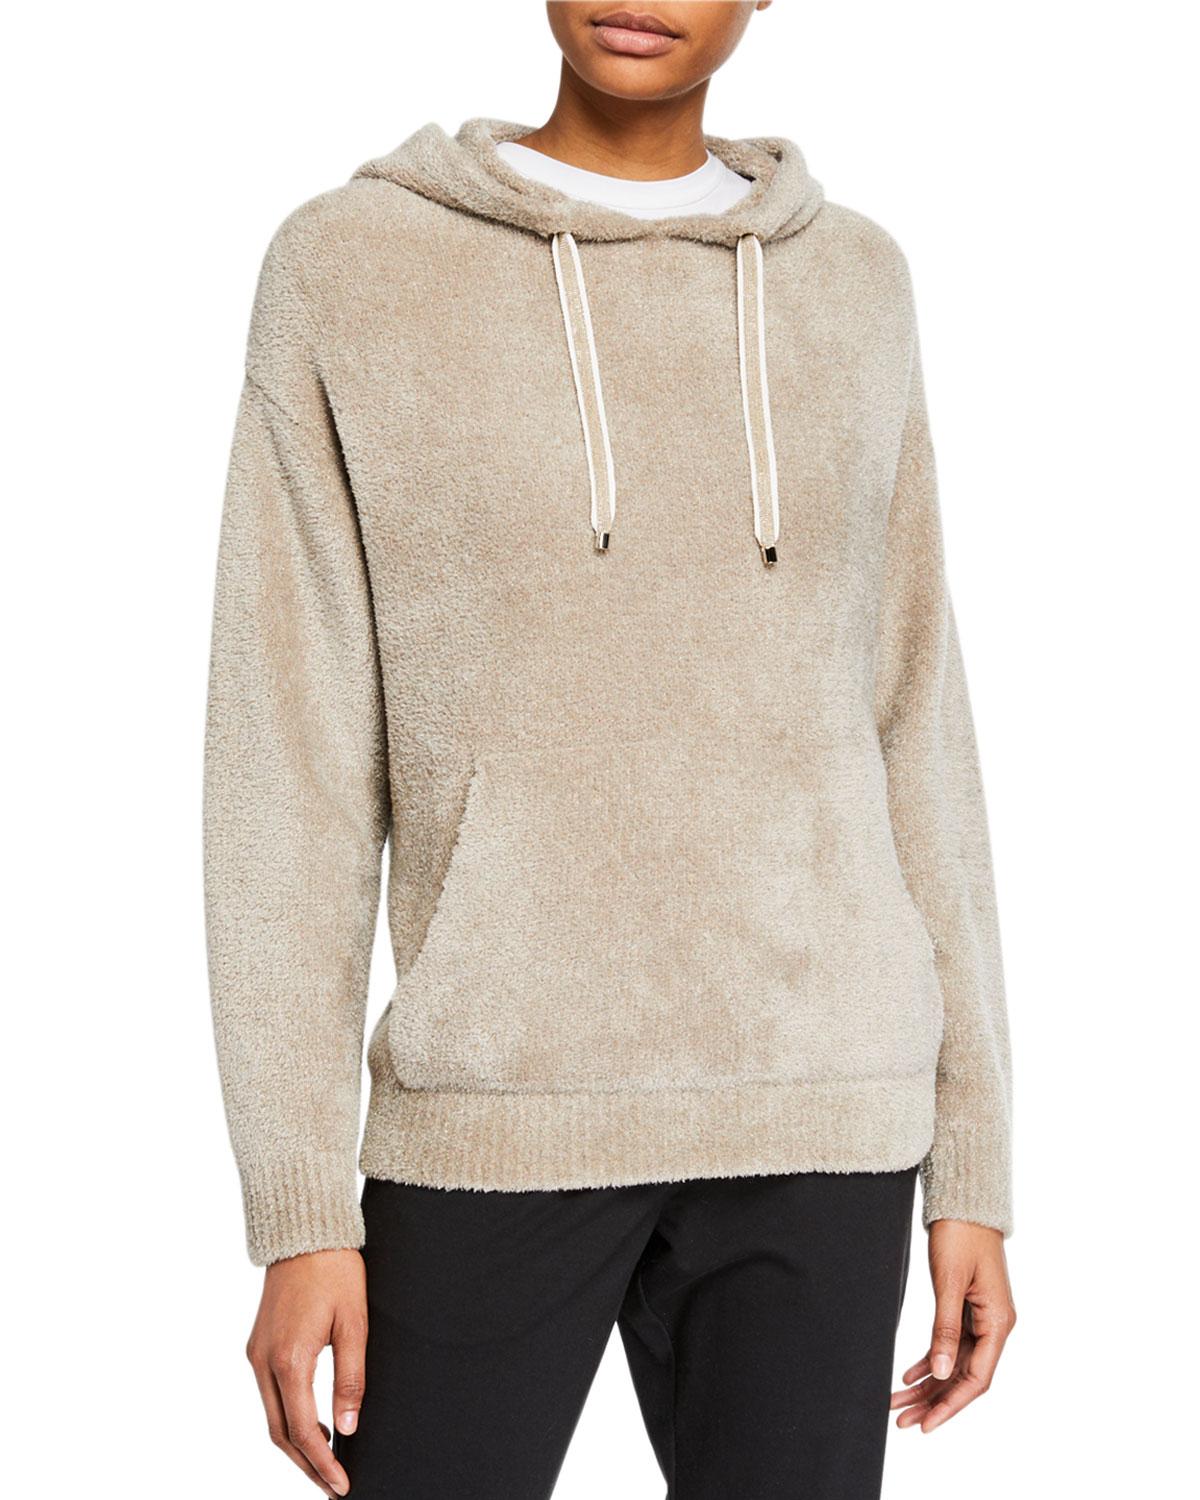 Brunello Cucinelli Cashmere Shimmer Cozy Knit Hoodie in Natural - Lyst